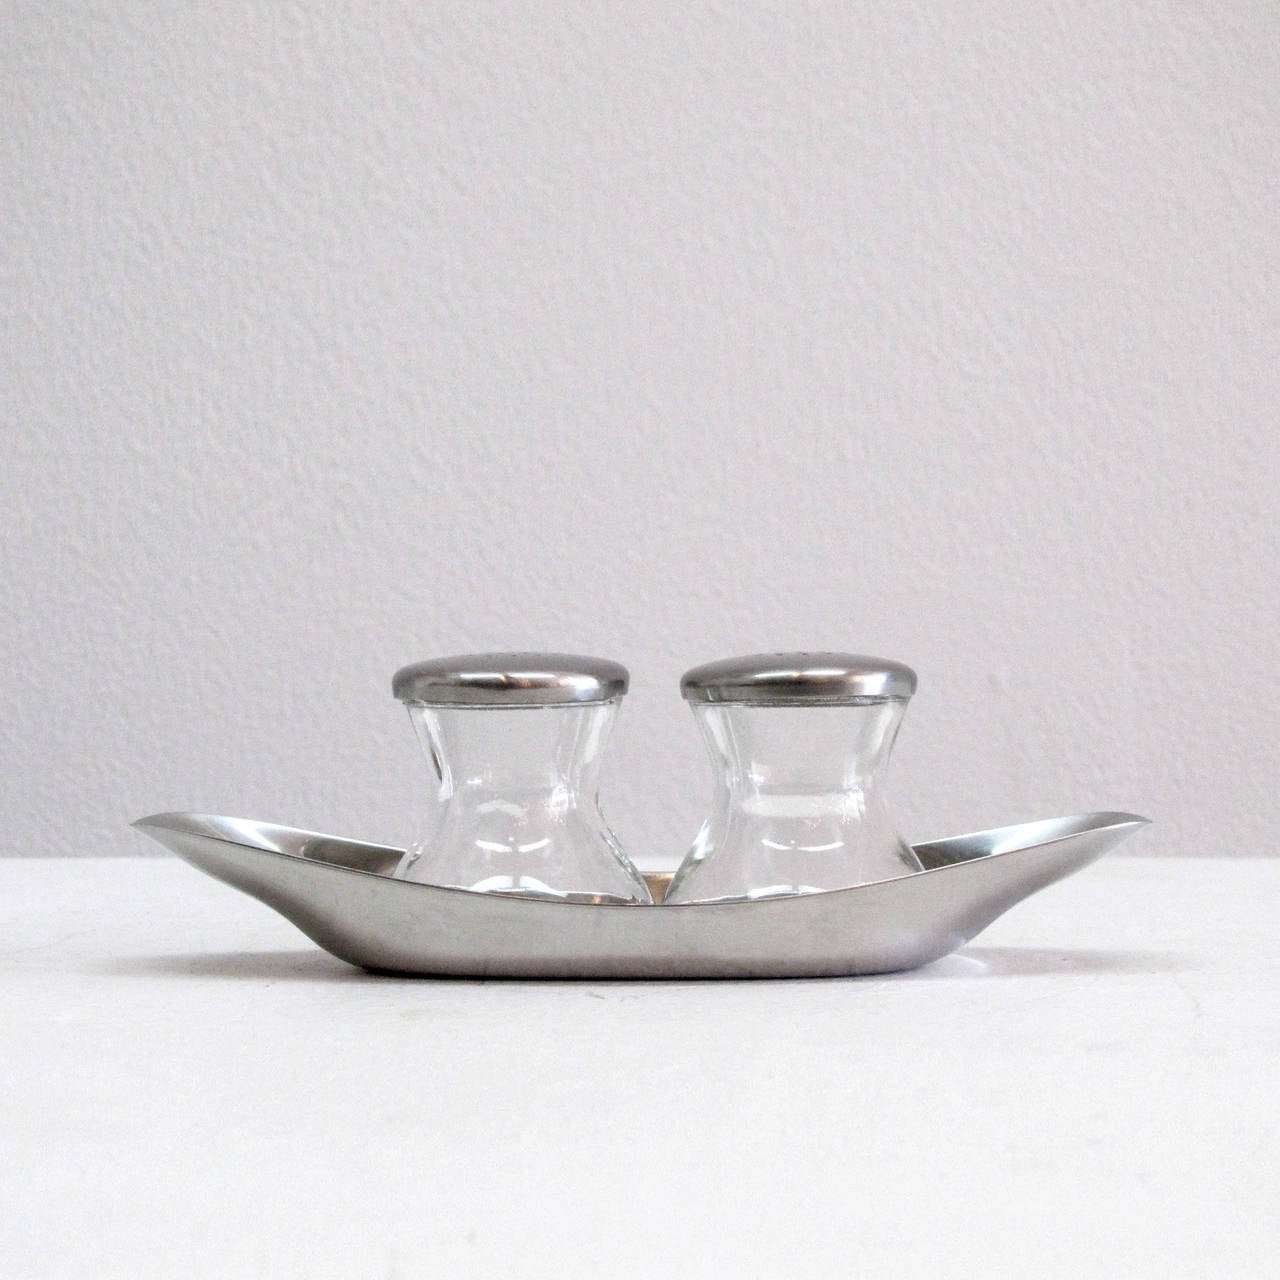 classic, complete salt and pepper shaker set by Wilhelm Wagenfeld for WMF, WV 505. the set includes two pressed glass shakers with perforated lids and a cromargan (stainless steel derivative) plate/holder, part of the MoMA permanent collection